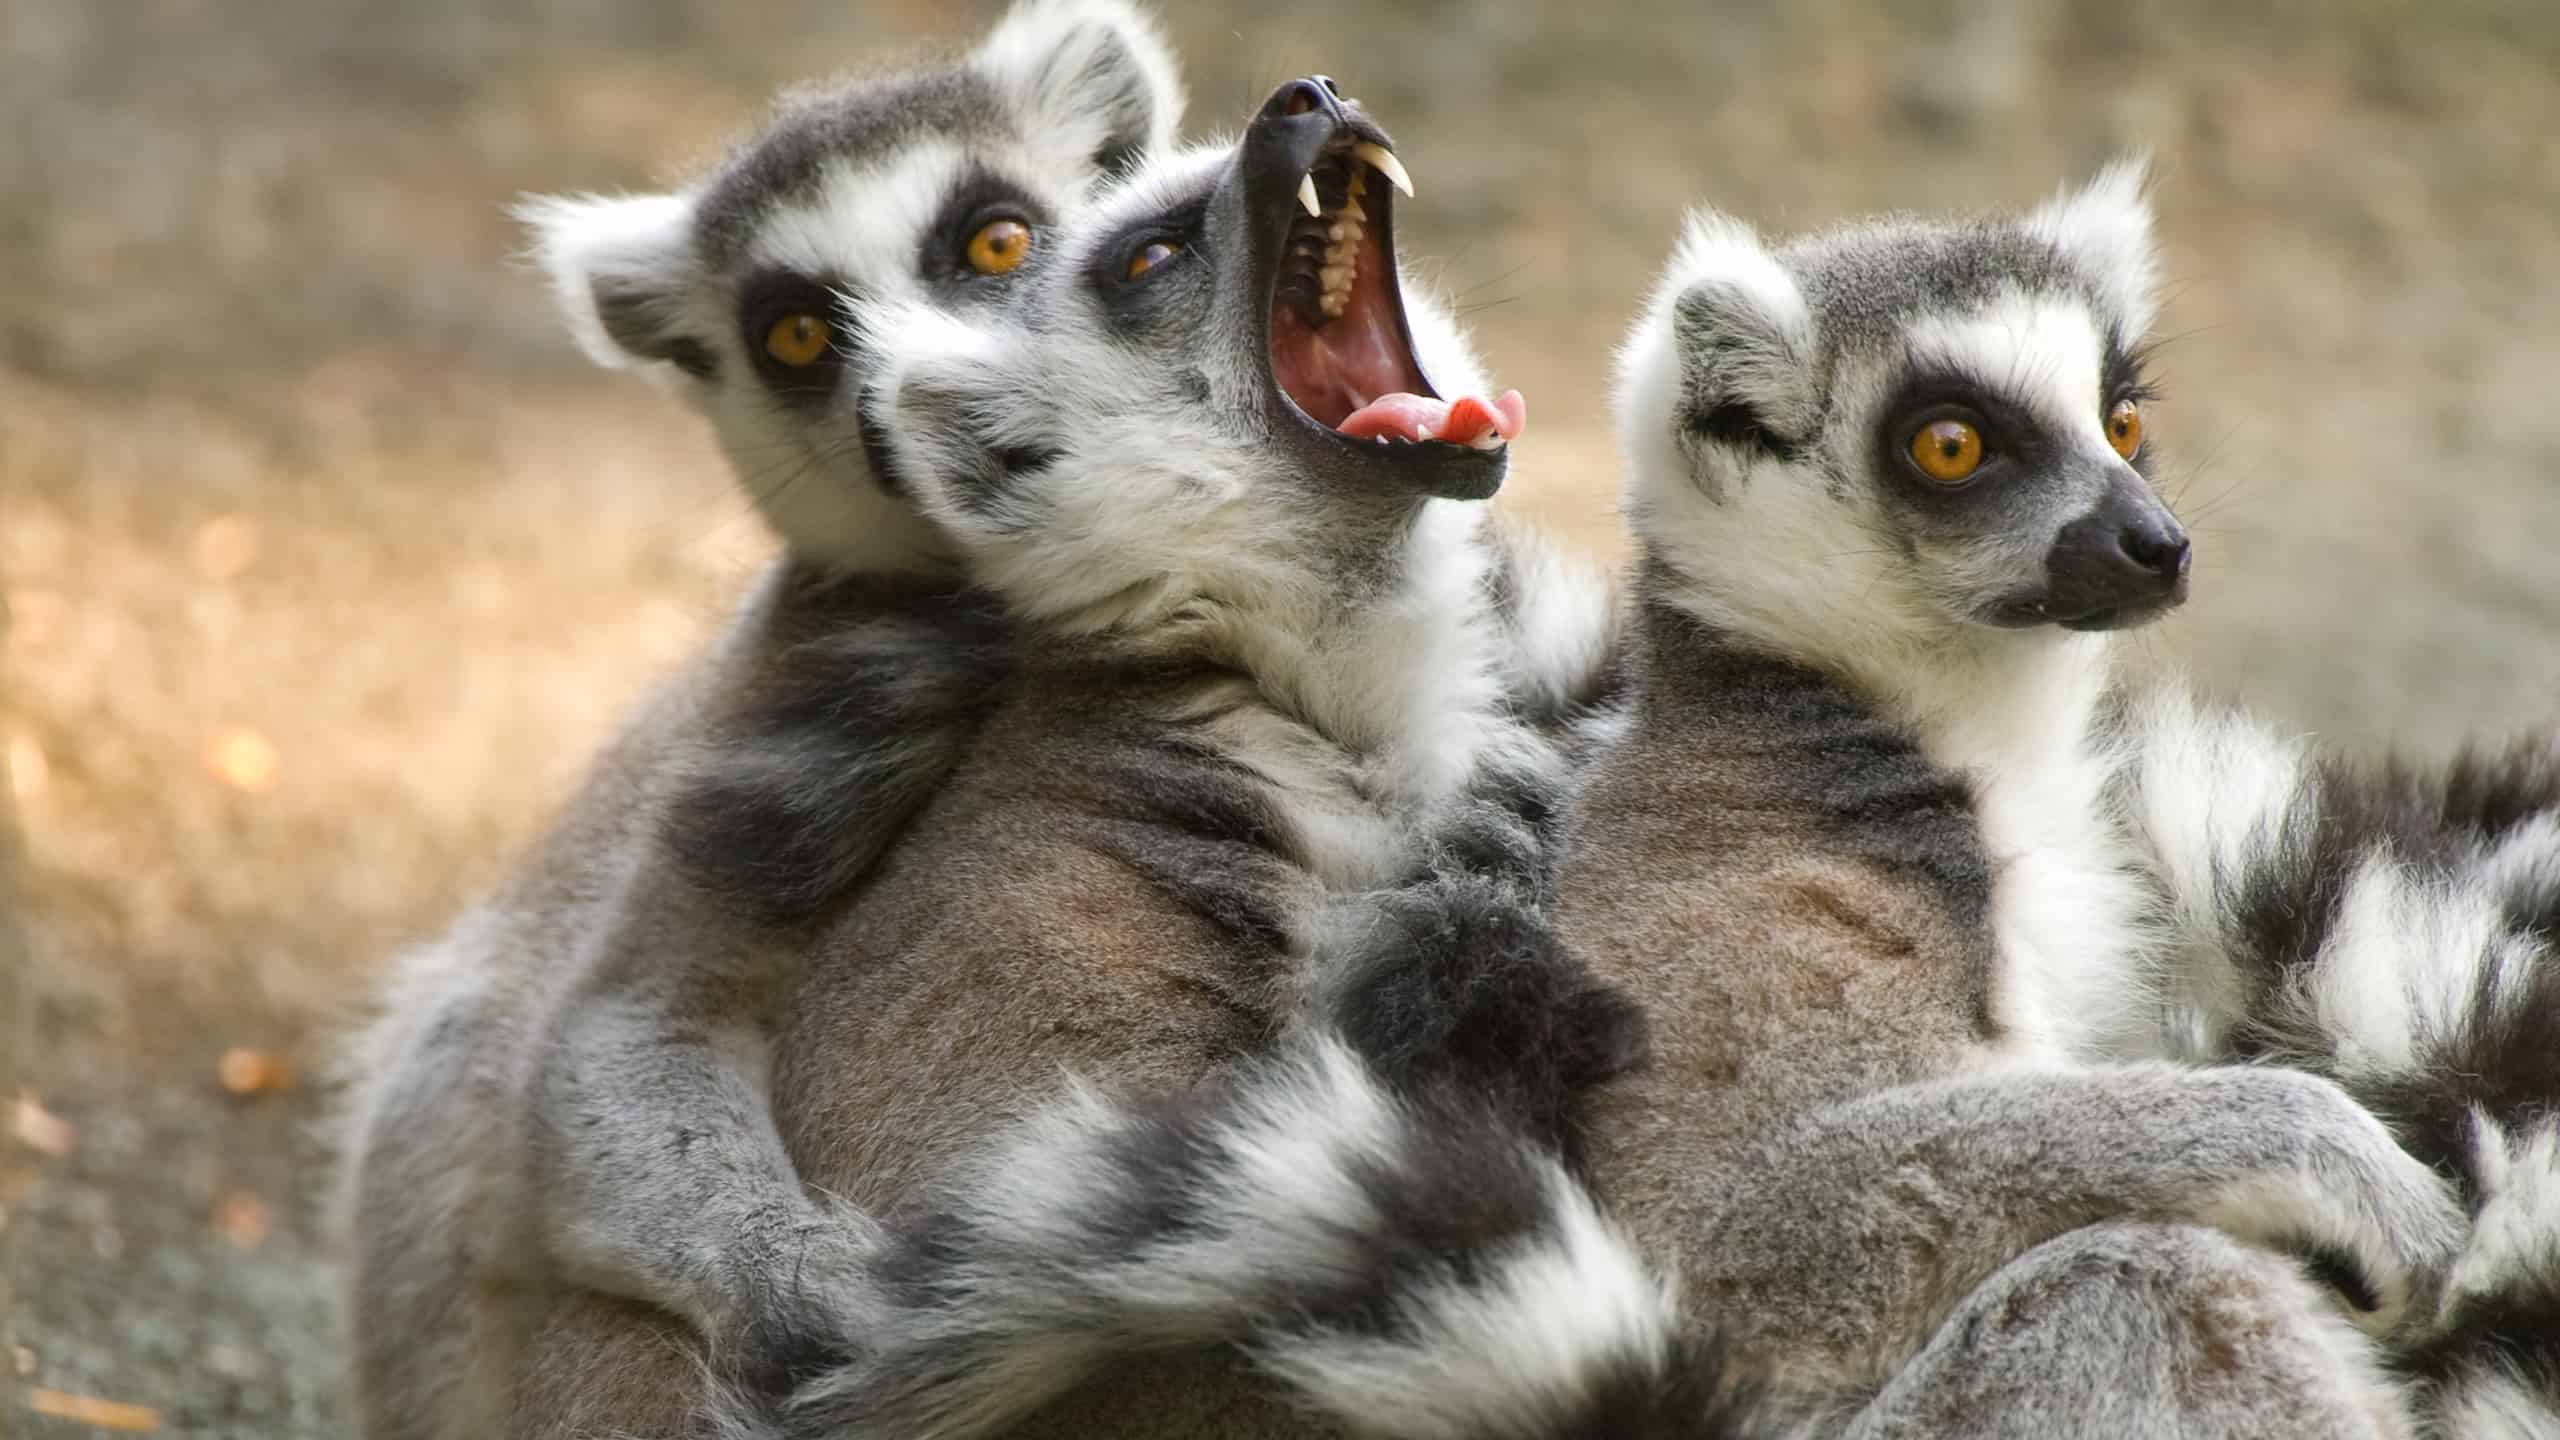 Yawning Ring-tailed Lemur (Lemur catta) with two other lemurs. Three total lemurs. The lemur in the center frame has its mouth open, exposing its canine teeth. The lemurs are taupe colored on their backs. They have white bellies. That have taupe and white rings on their tails.